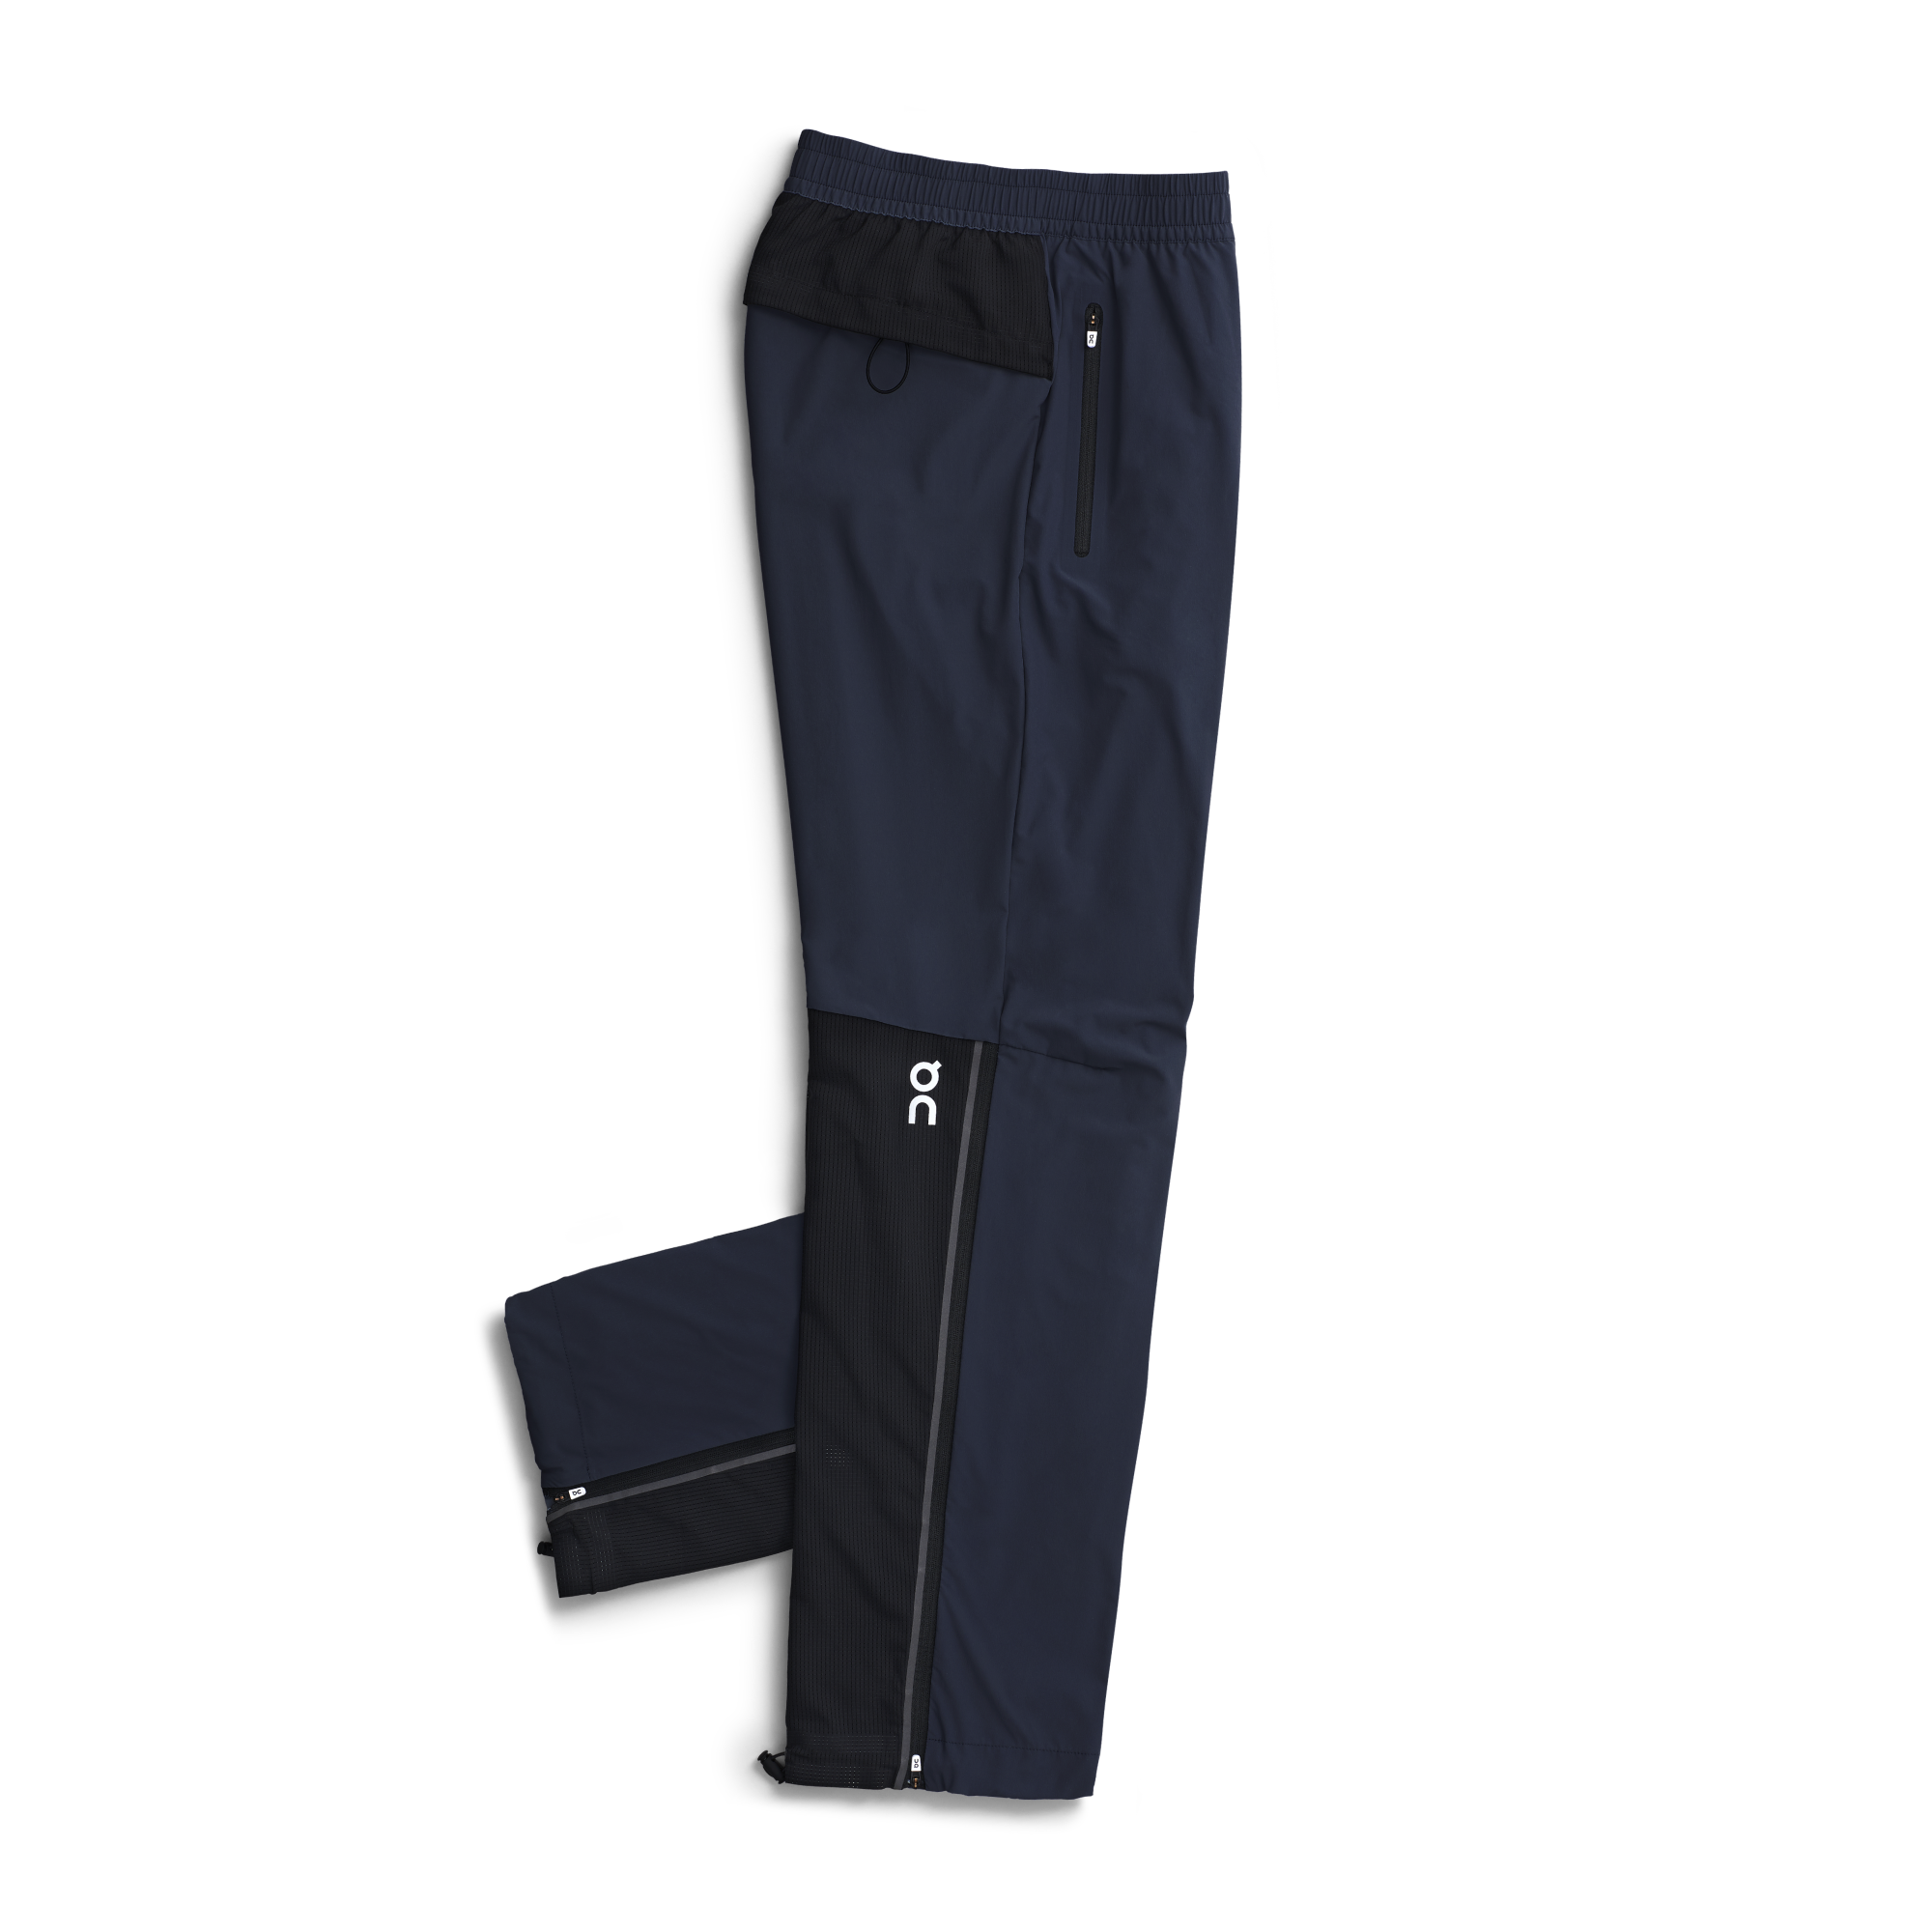 Buy online Men Navy Blue Lycra Blend Ankle Length Track Pant from Sports  Wear for Men by Sti for ₹299 at 70% off